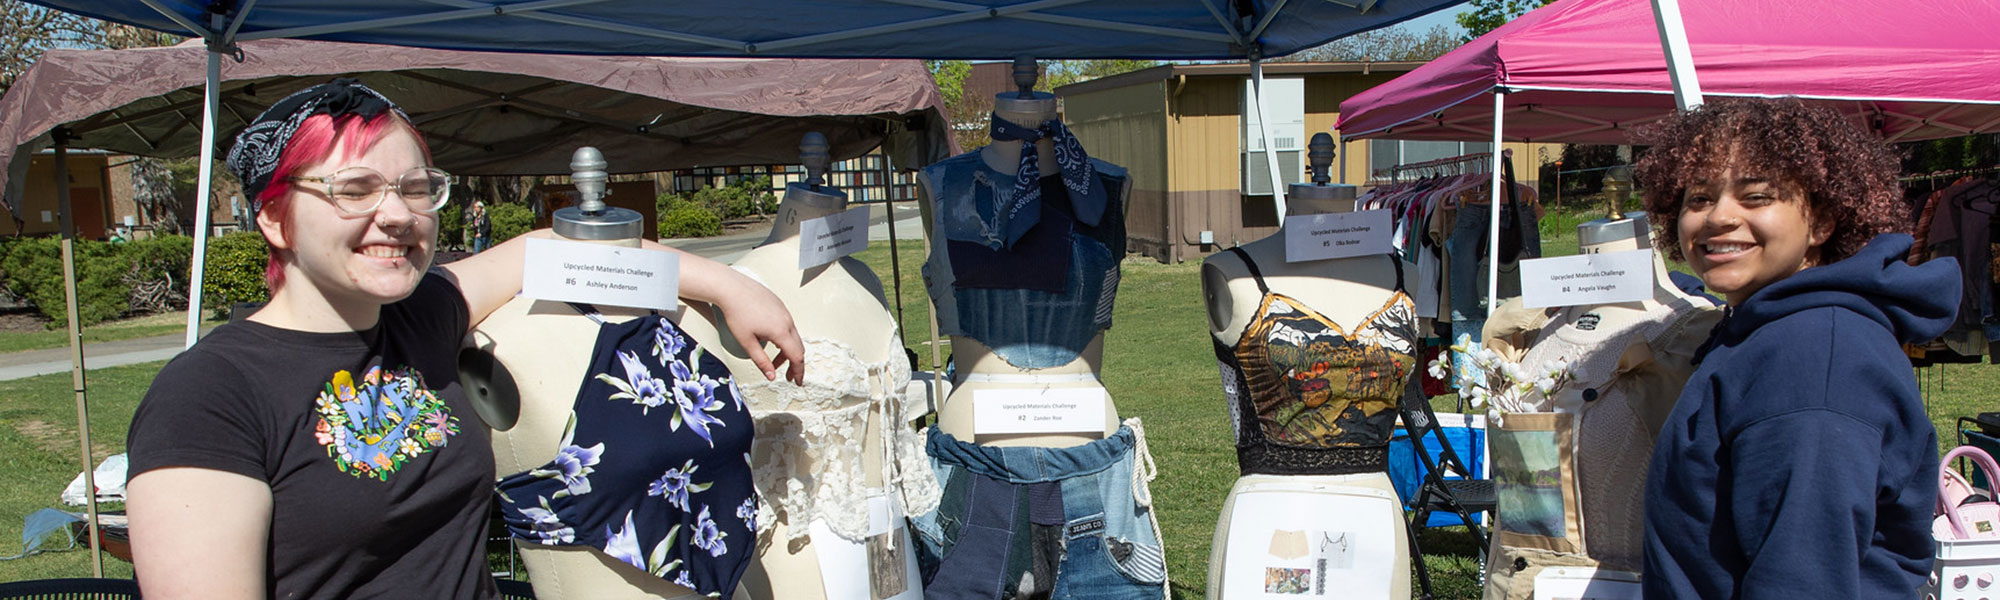 Students show their eco-clothing designs at campus event